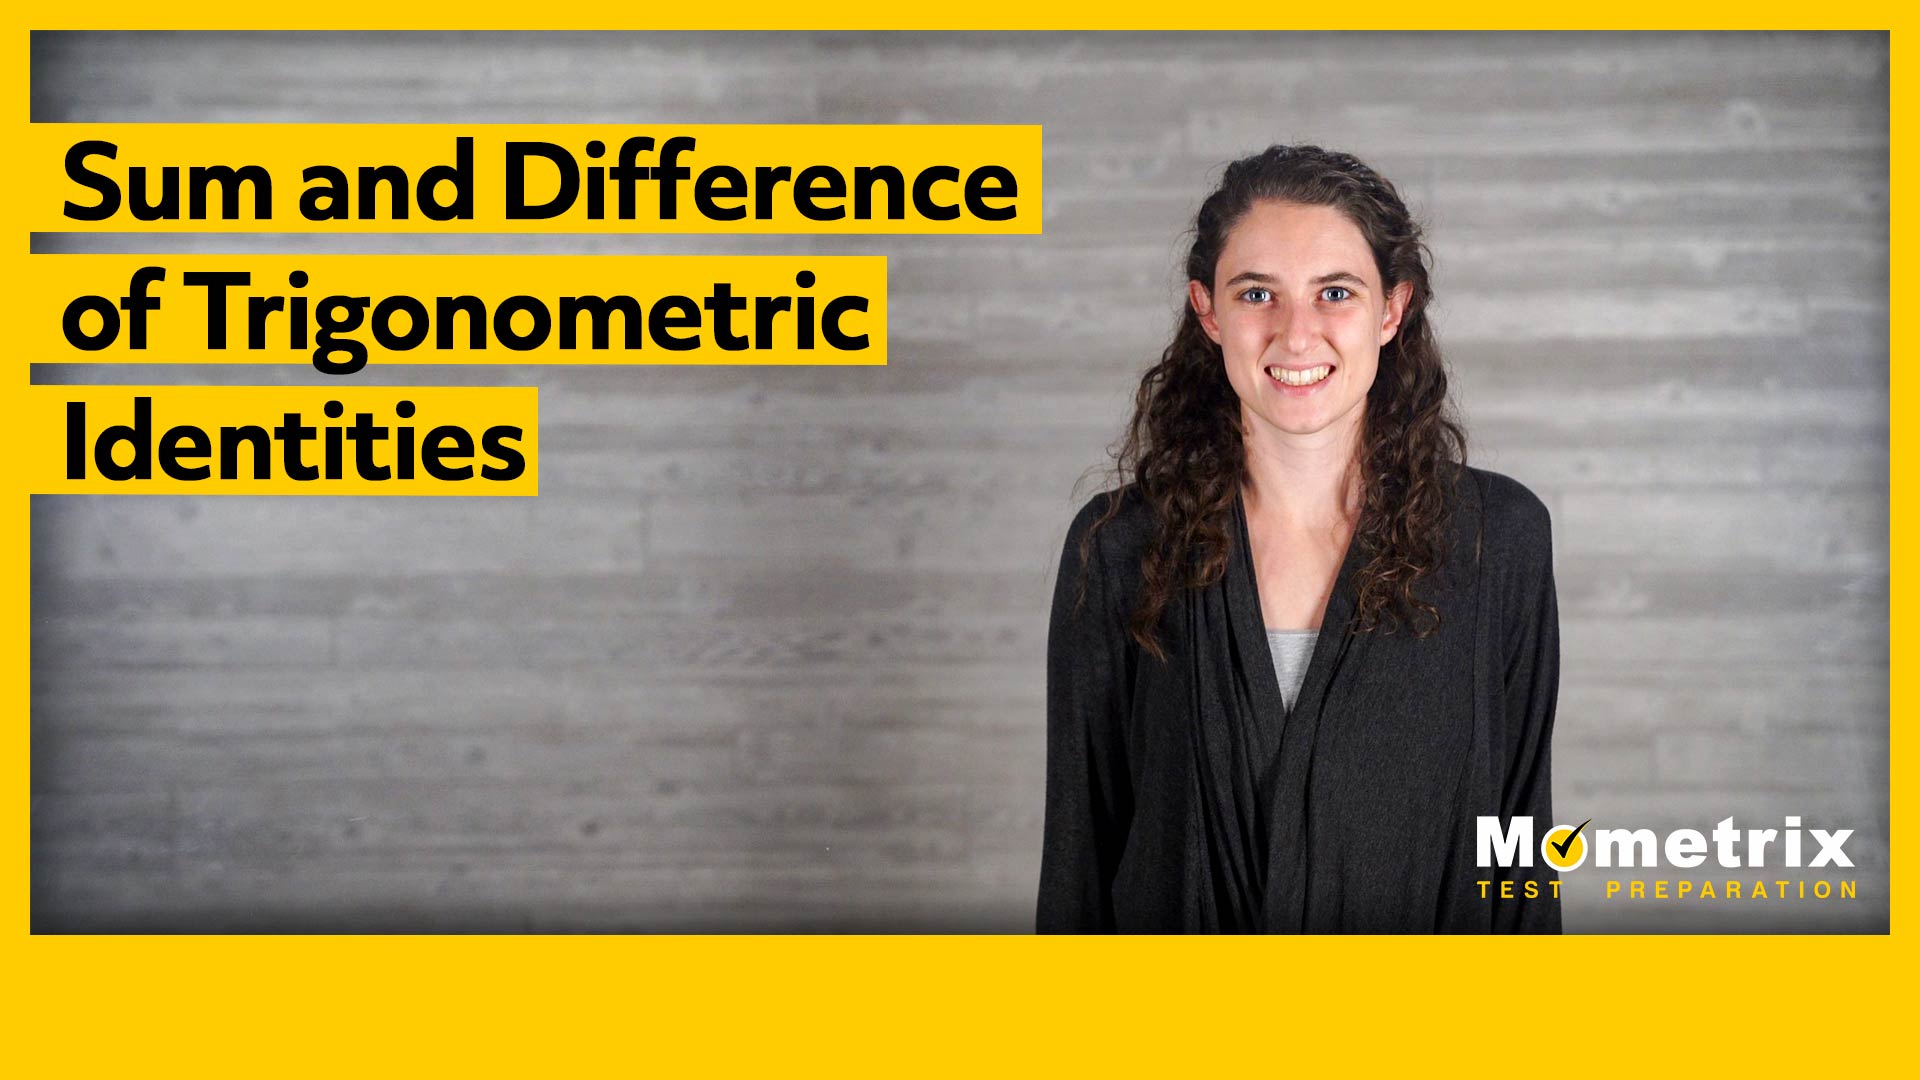 A person stands smiling in front of a gray background. The text next to them reads "Sum and Difference of Trigonometric Identities." The image also features the Mometrix Test Preparation logo.